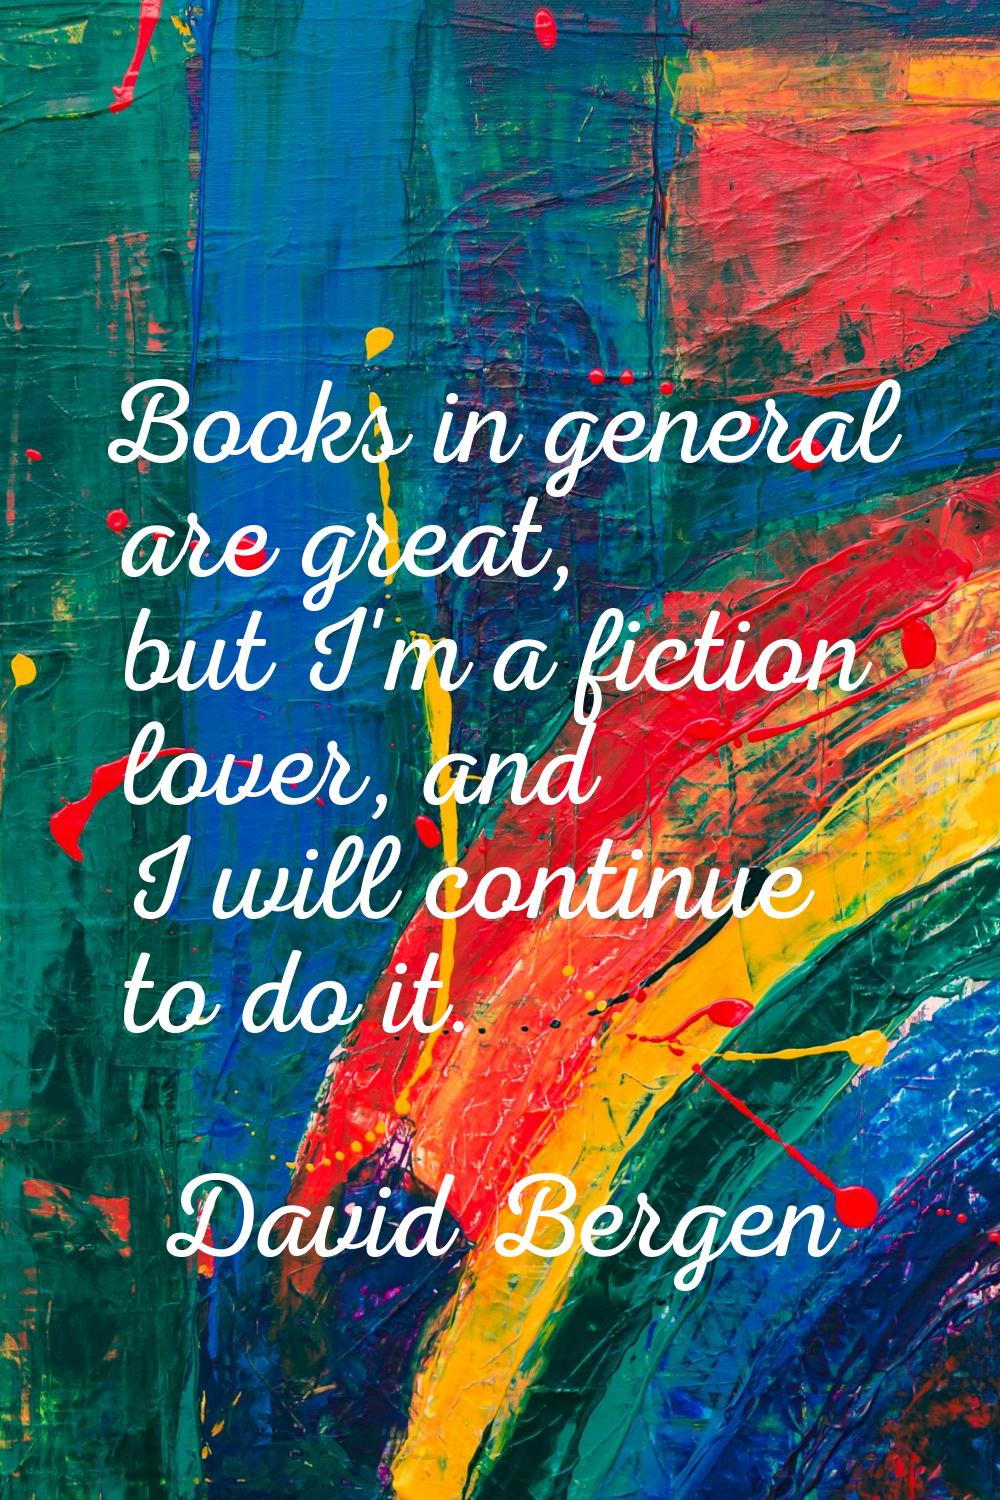 Books in general are great, but I'm a fiction lover, and I will continue to do it.